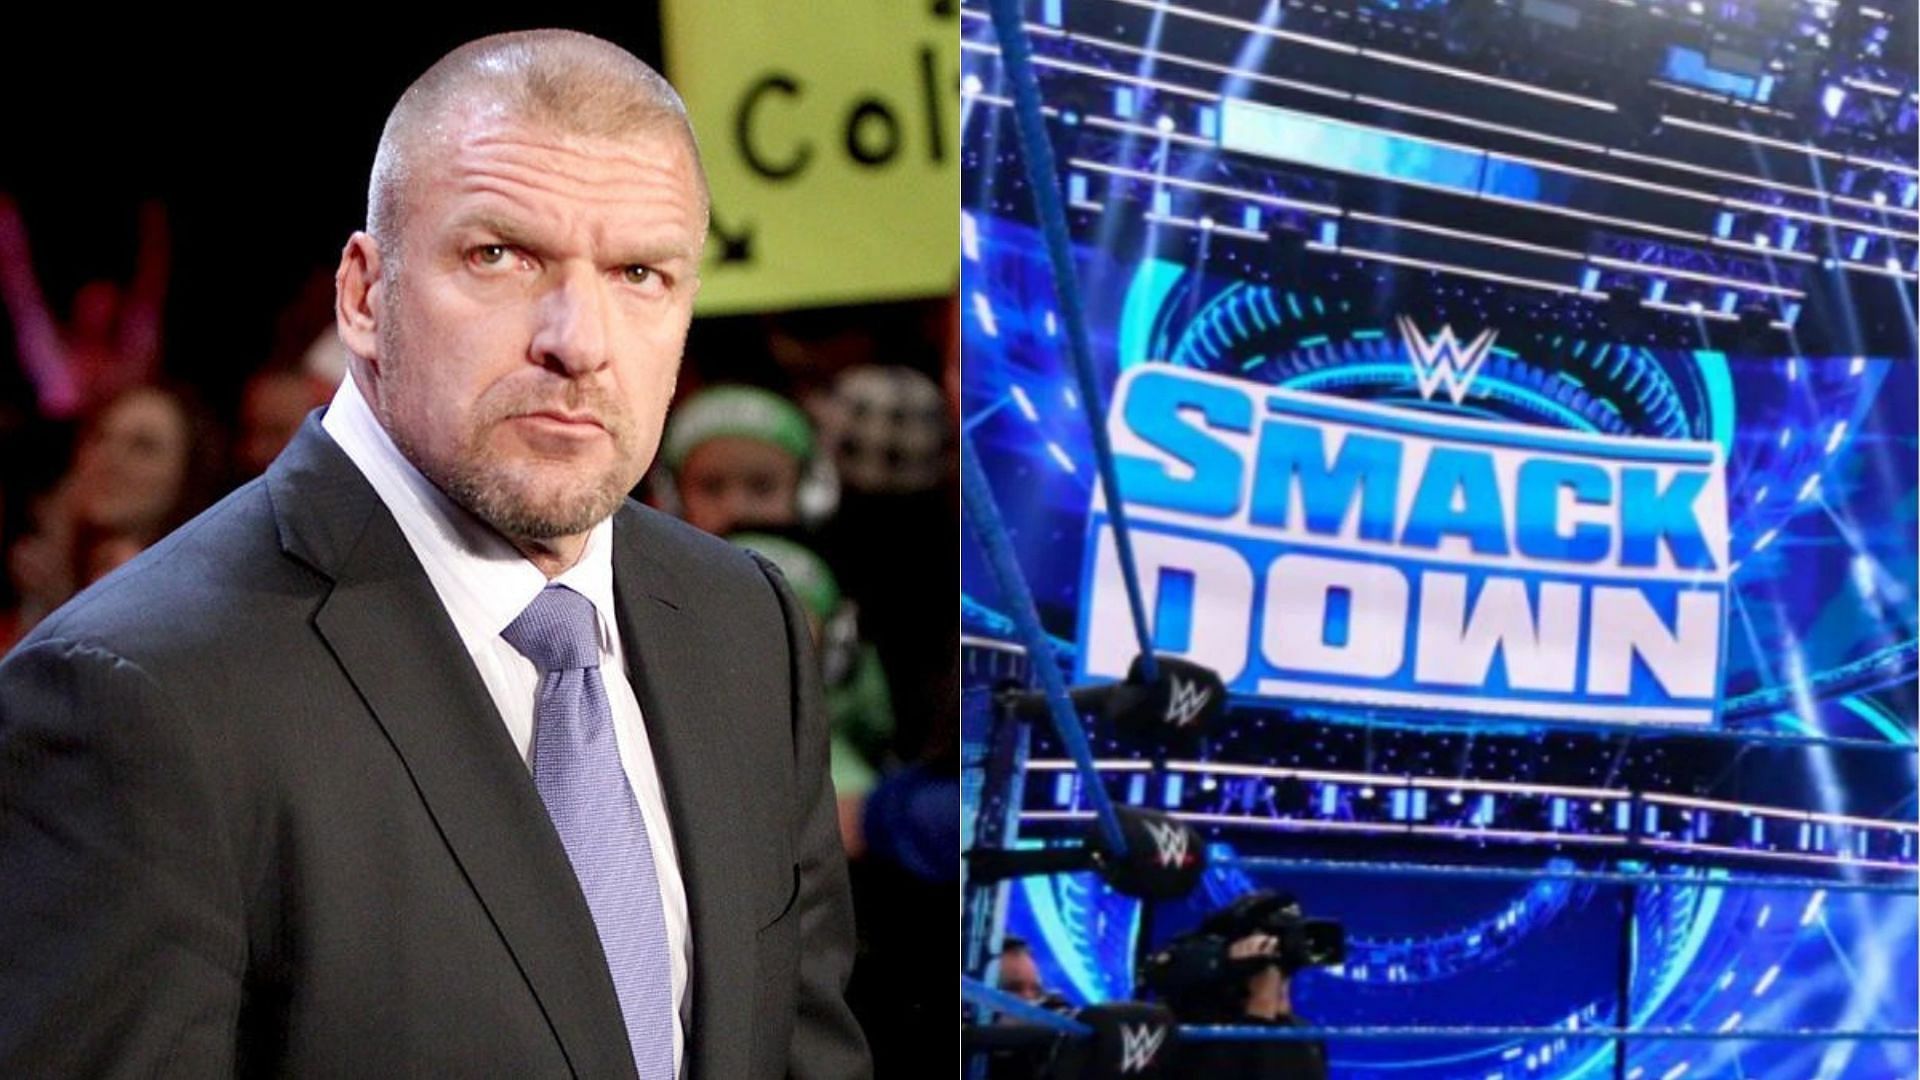 Triple H replaced Vince McMahon as WWE&#039;s creative leader.